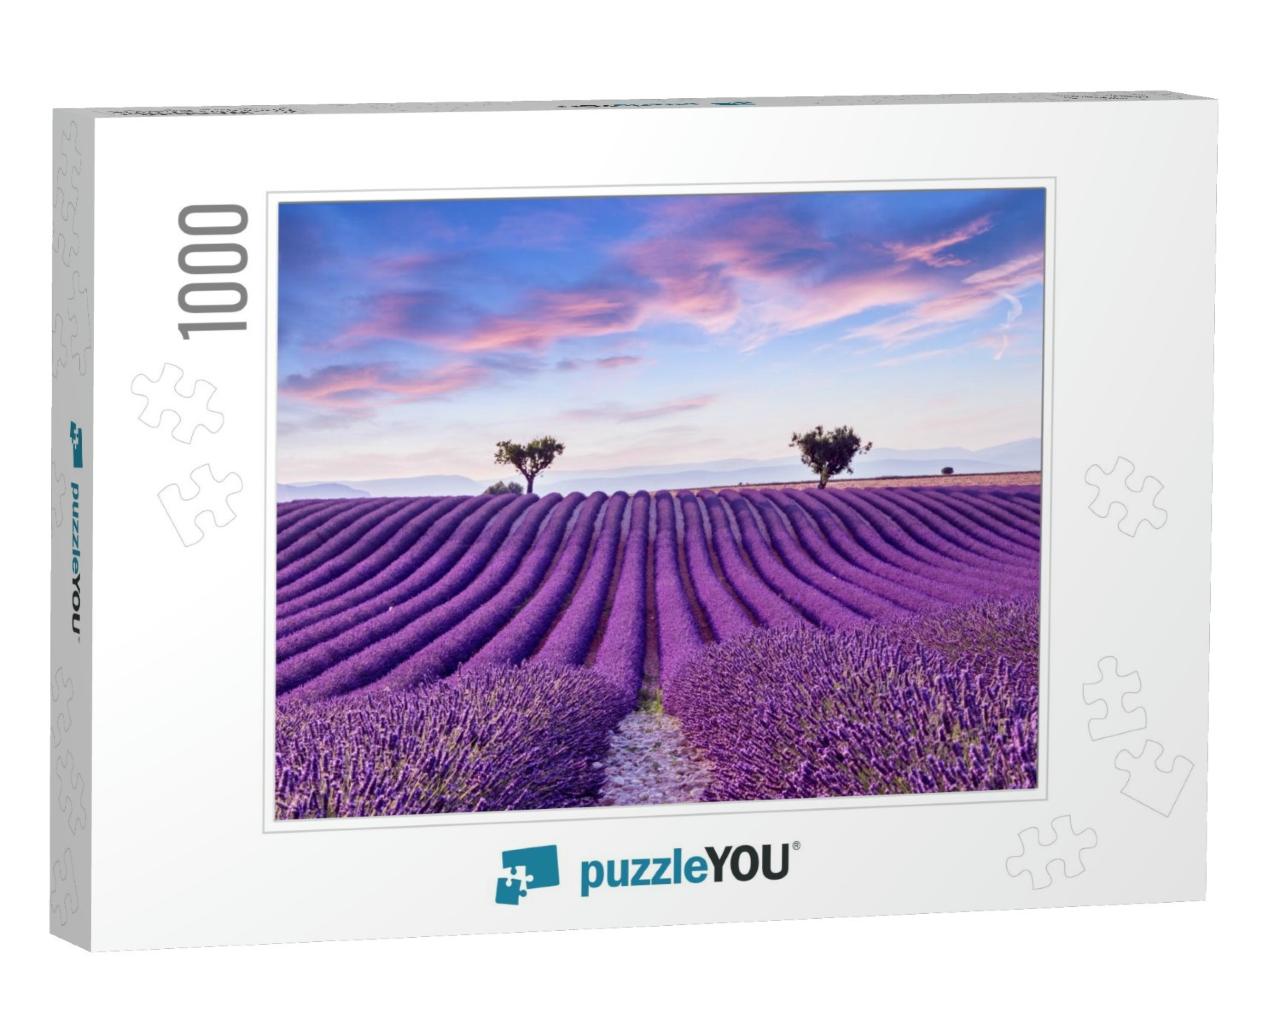 Lavender Field Summer Sunset Landscape Near Valensole. Pr... Jigsaw Puzzle with 1000 pieces